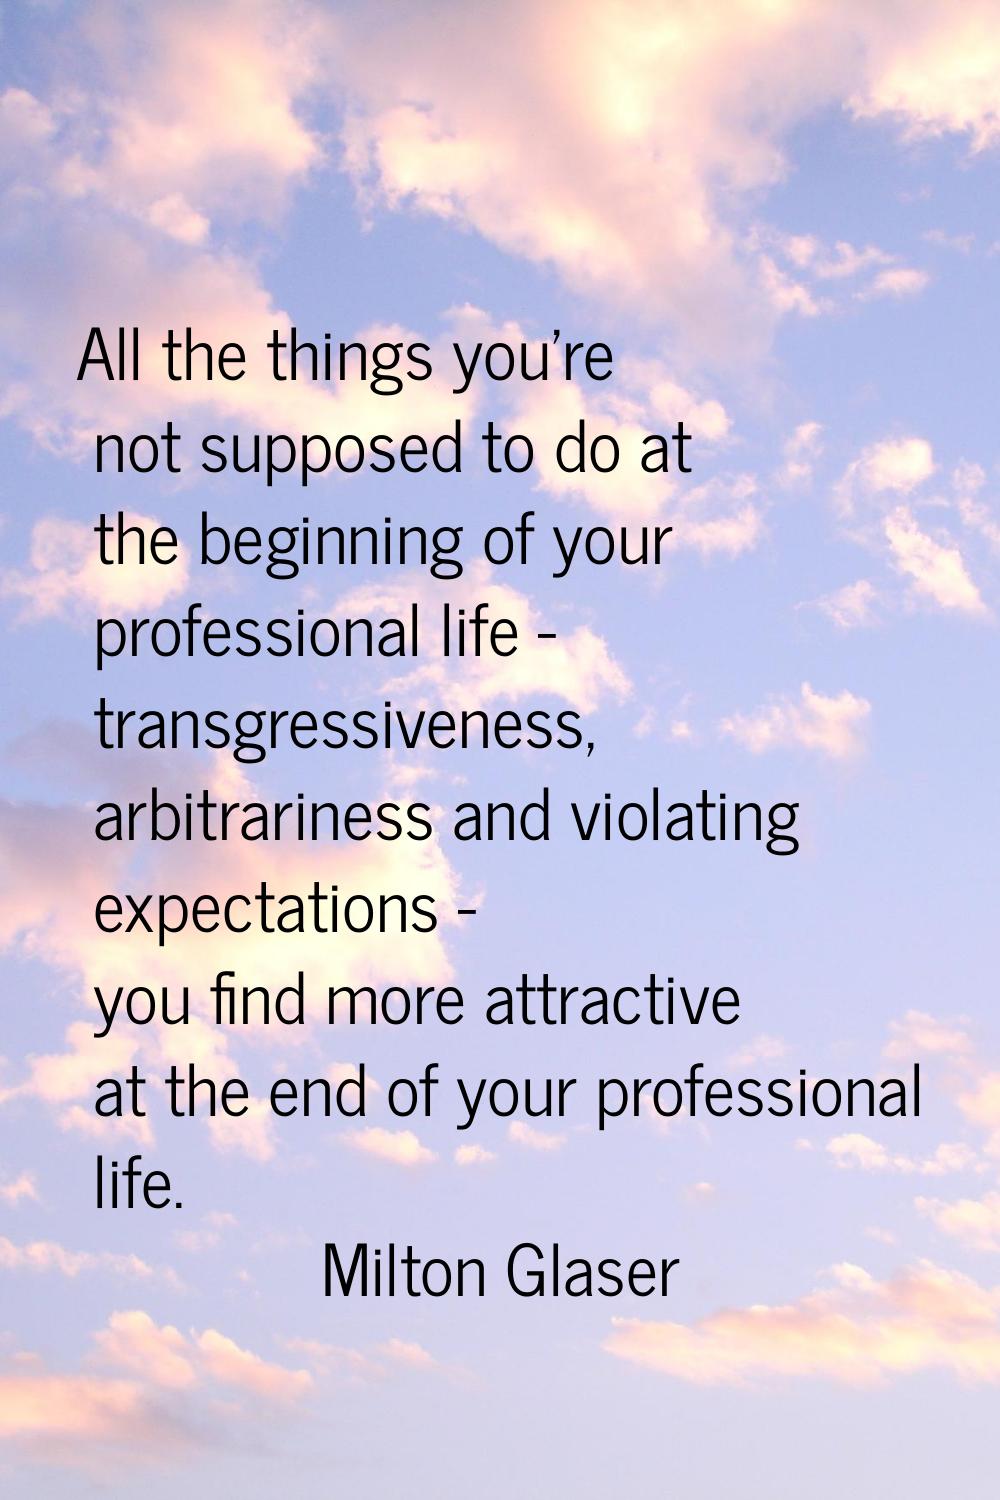 All the things you're not supposed to do at the beginning of your professional life - transgressive